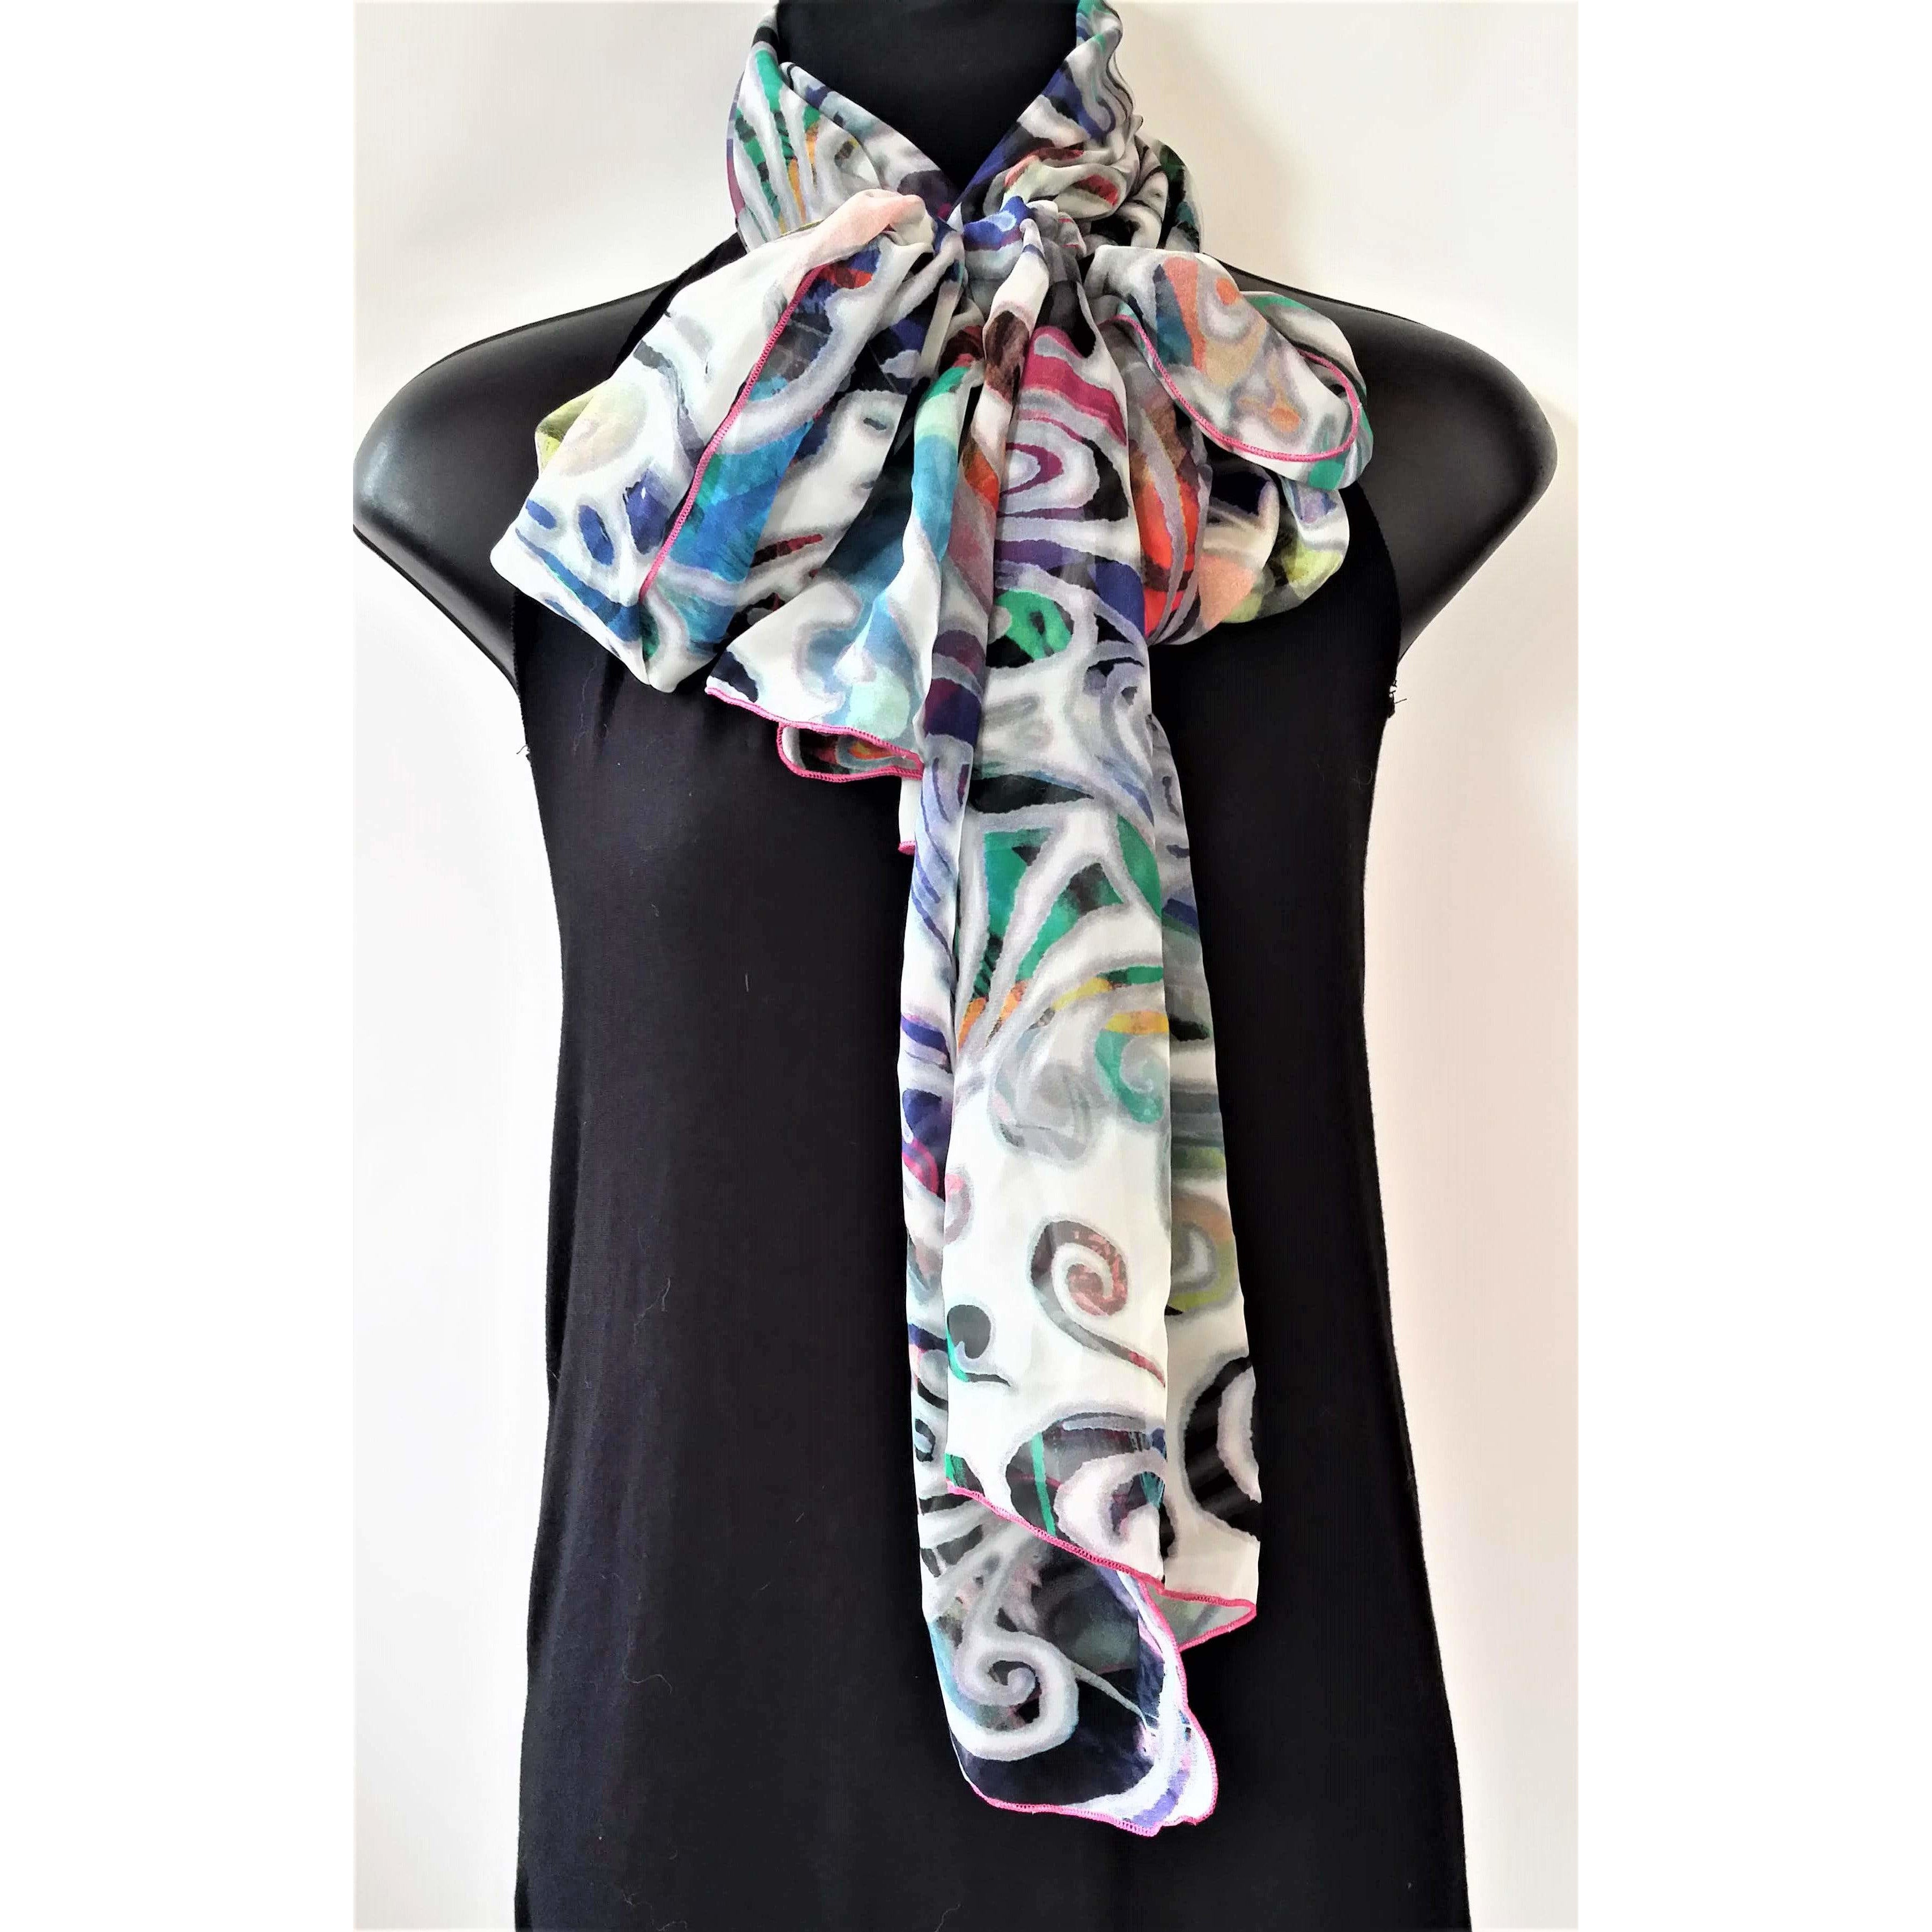 Fabric Scarf- Multi Coloured- Soft drape- Sheer Texture- Polyester